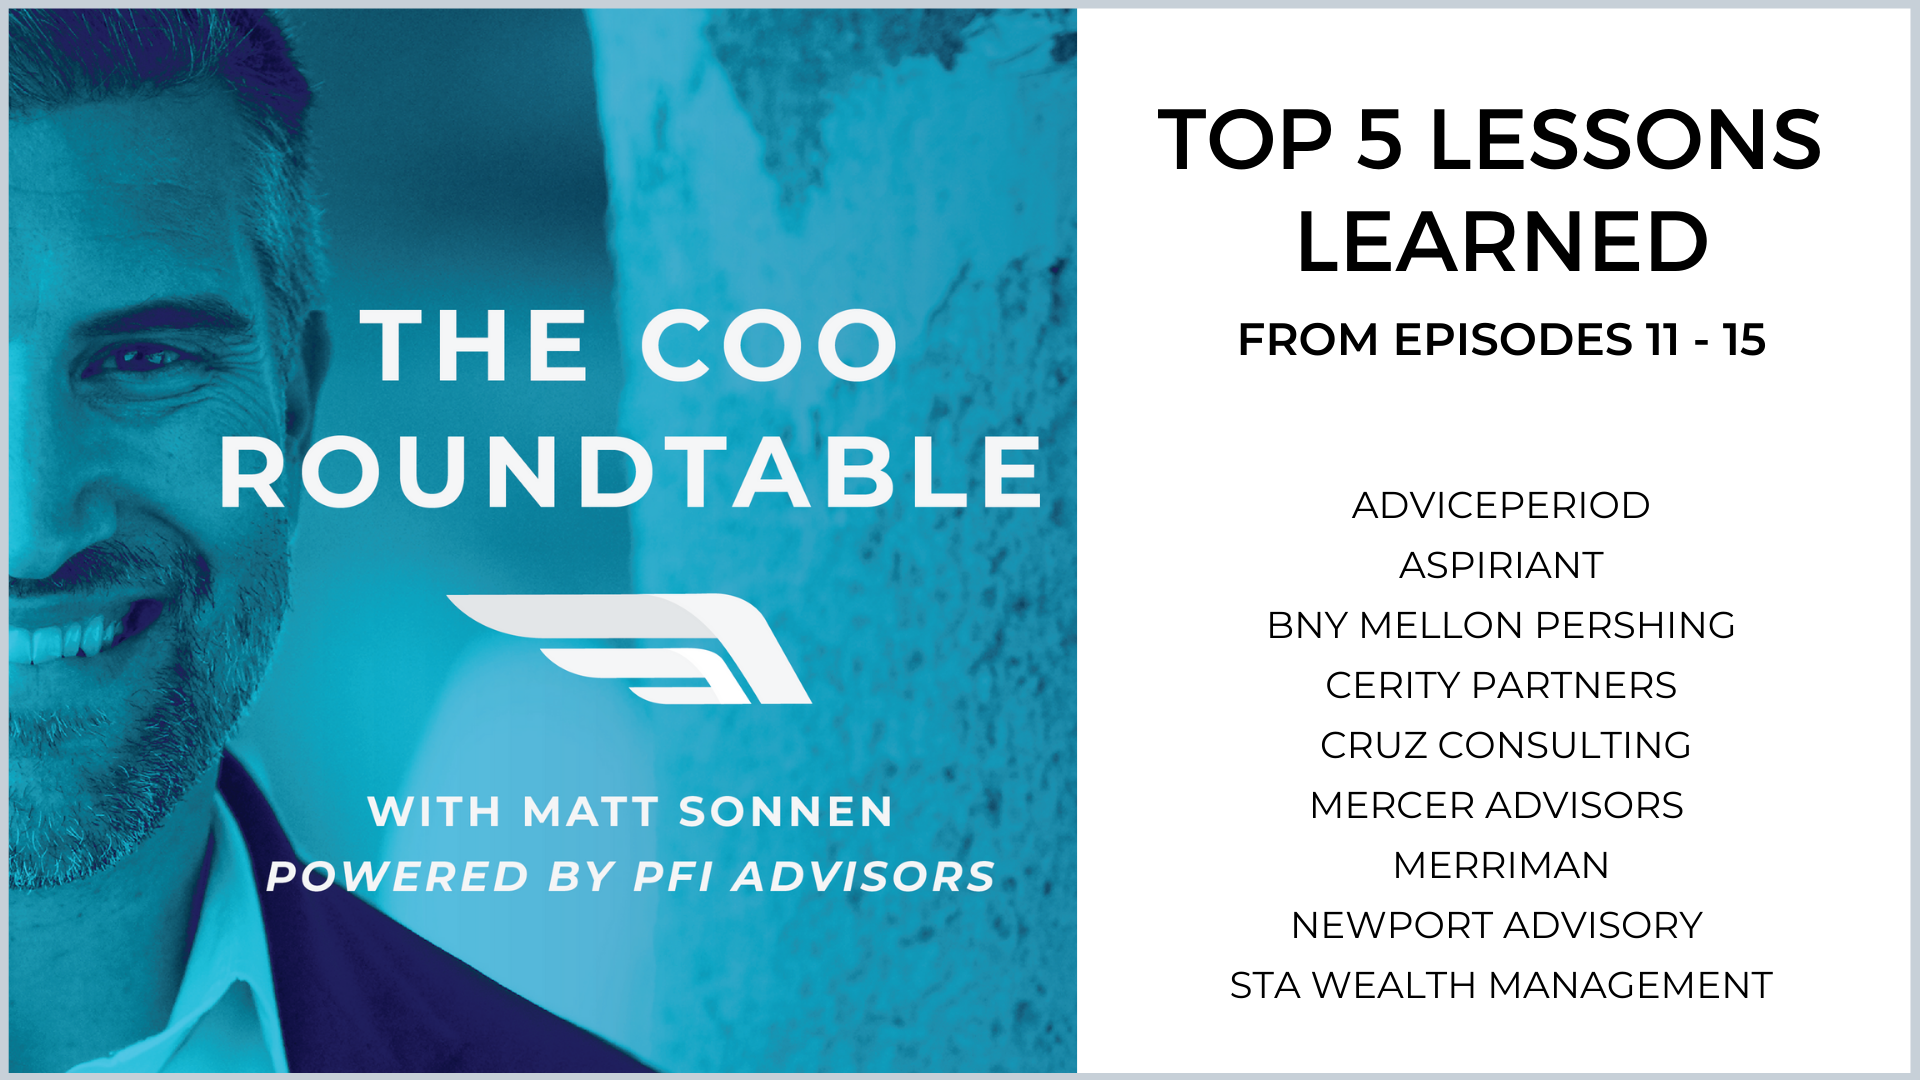 Top 5 Lessons Learned from Episodes  11-15 of The COO Roundtable